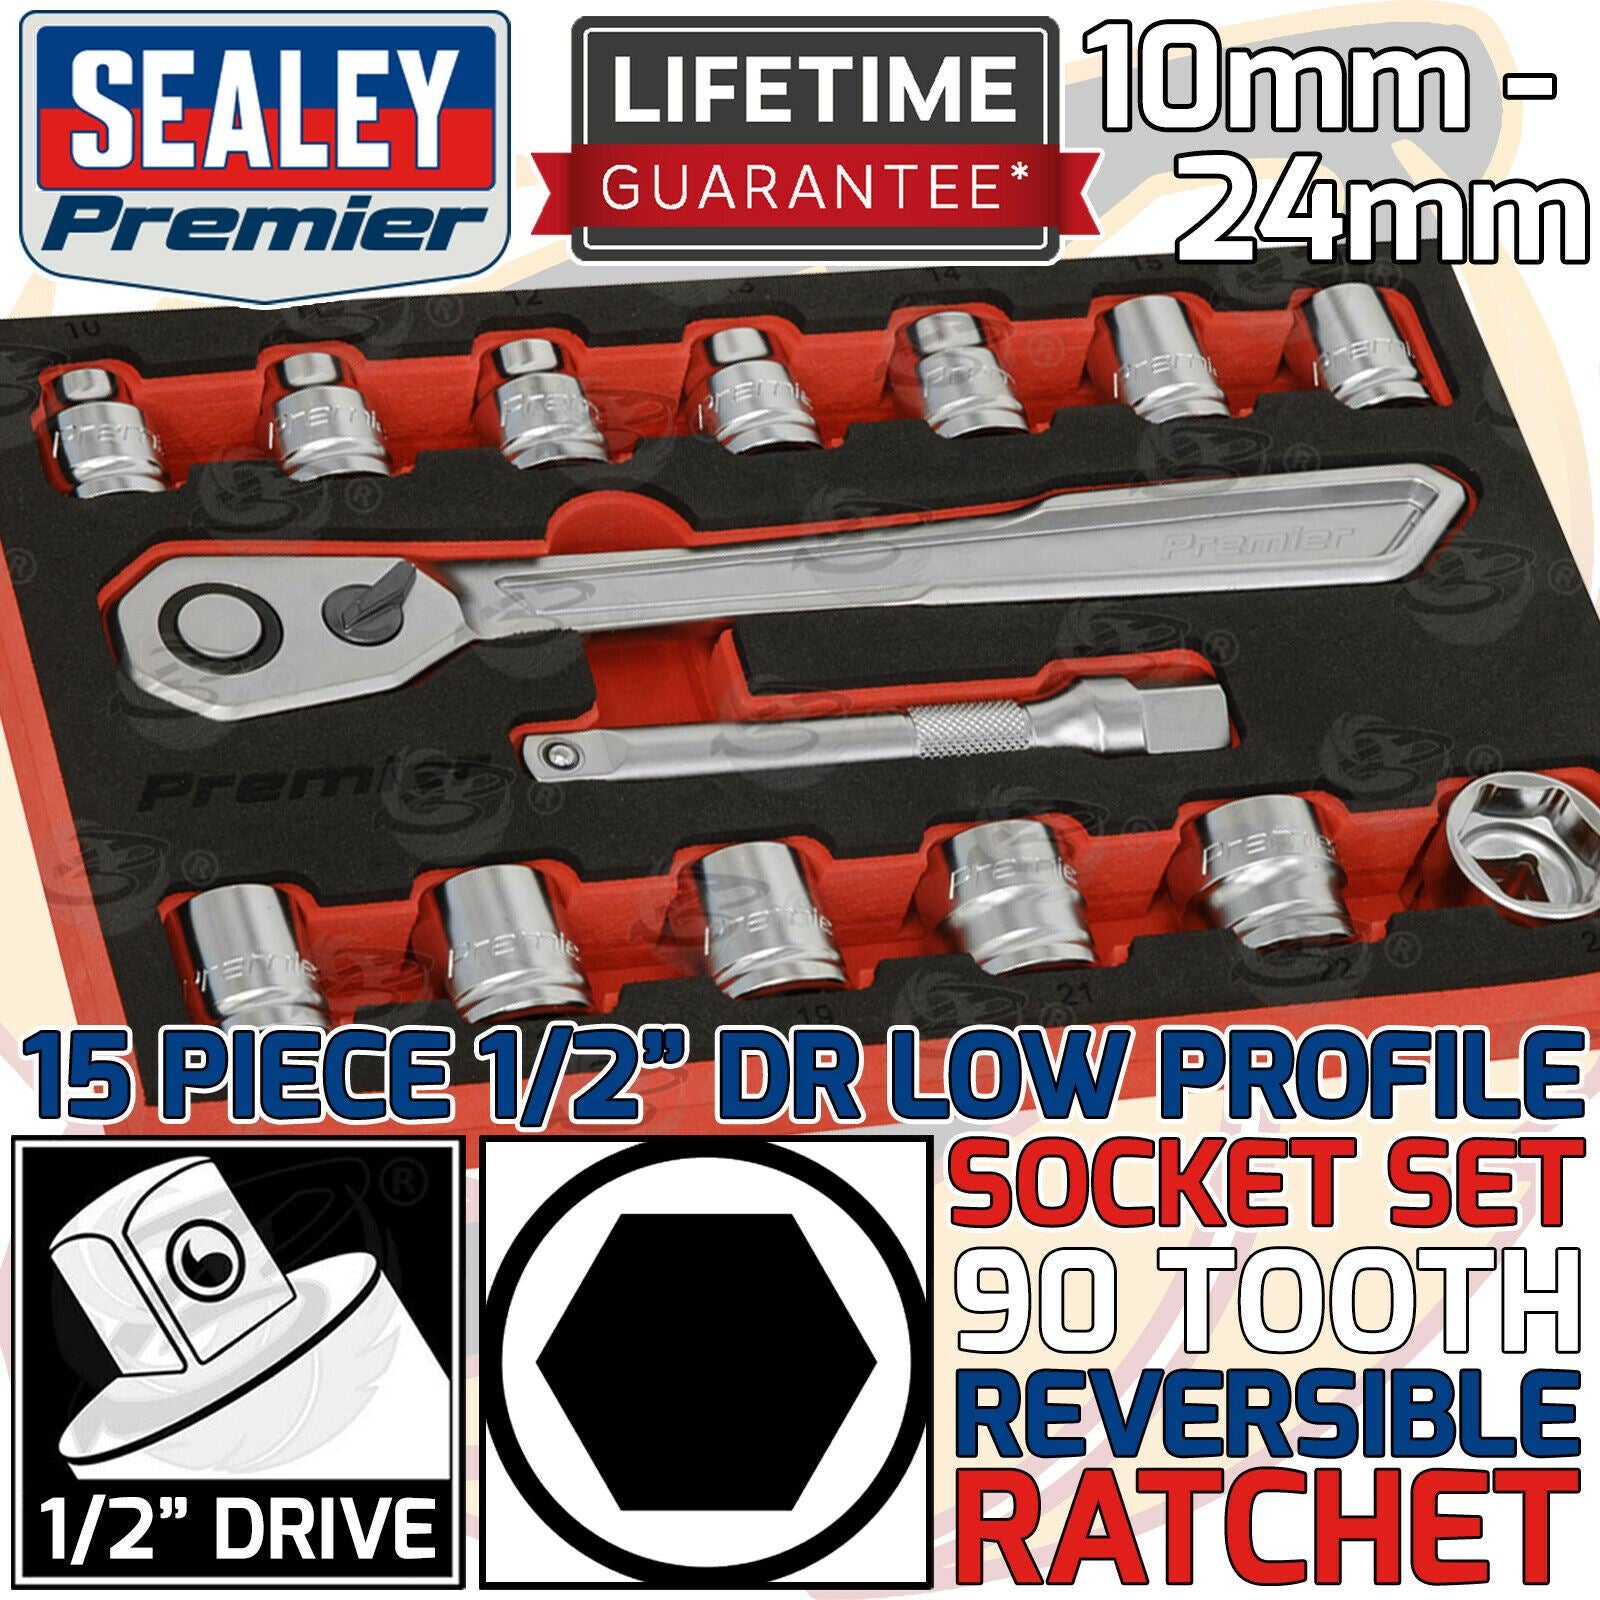 SEALEY 15PCS 1/2" DRIVE 6 POINT 90 TOOTH LOW PROFILE SOCKET SET 10MM - 24MM